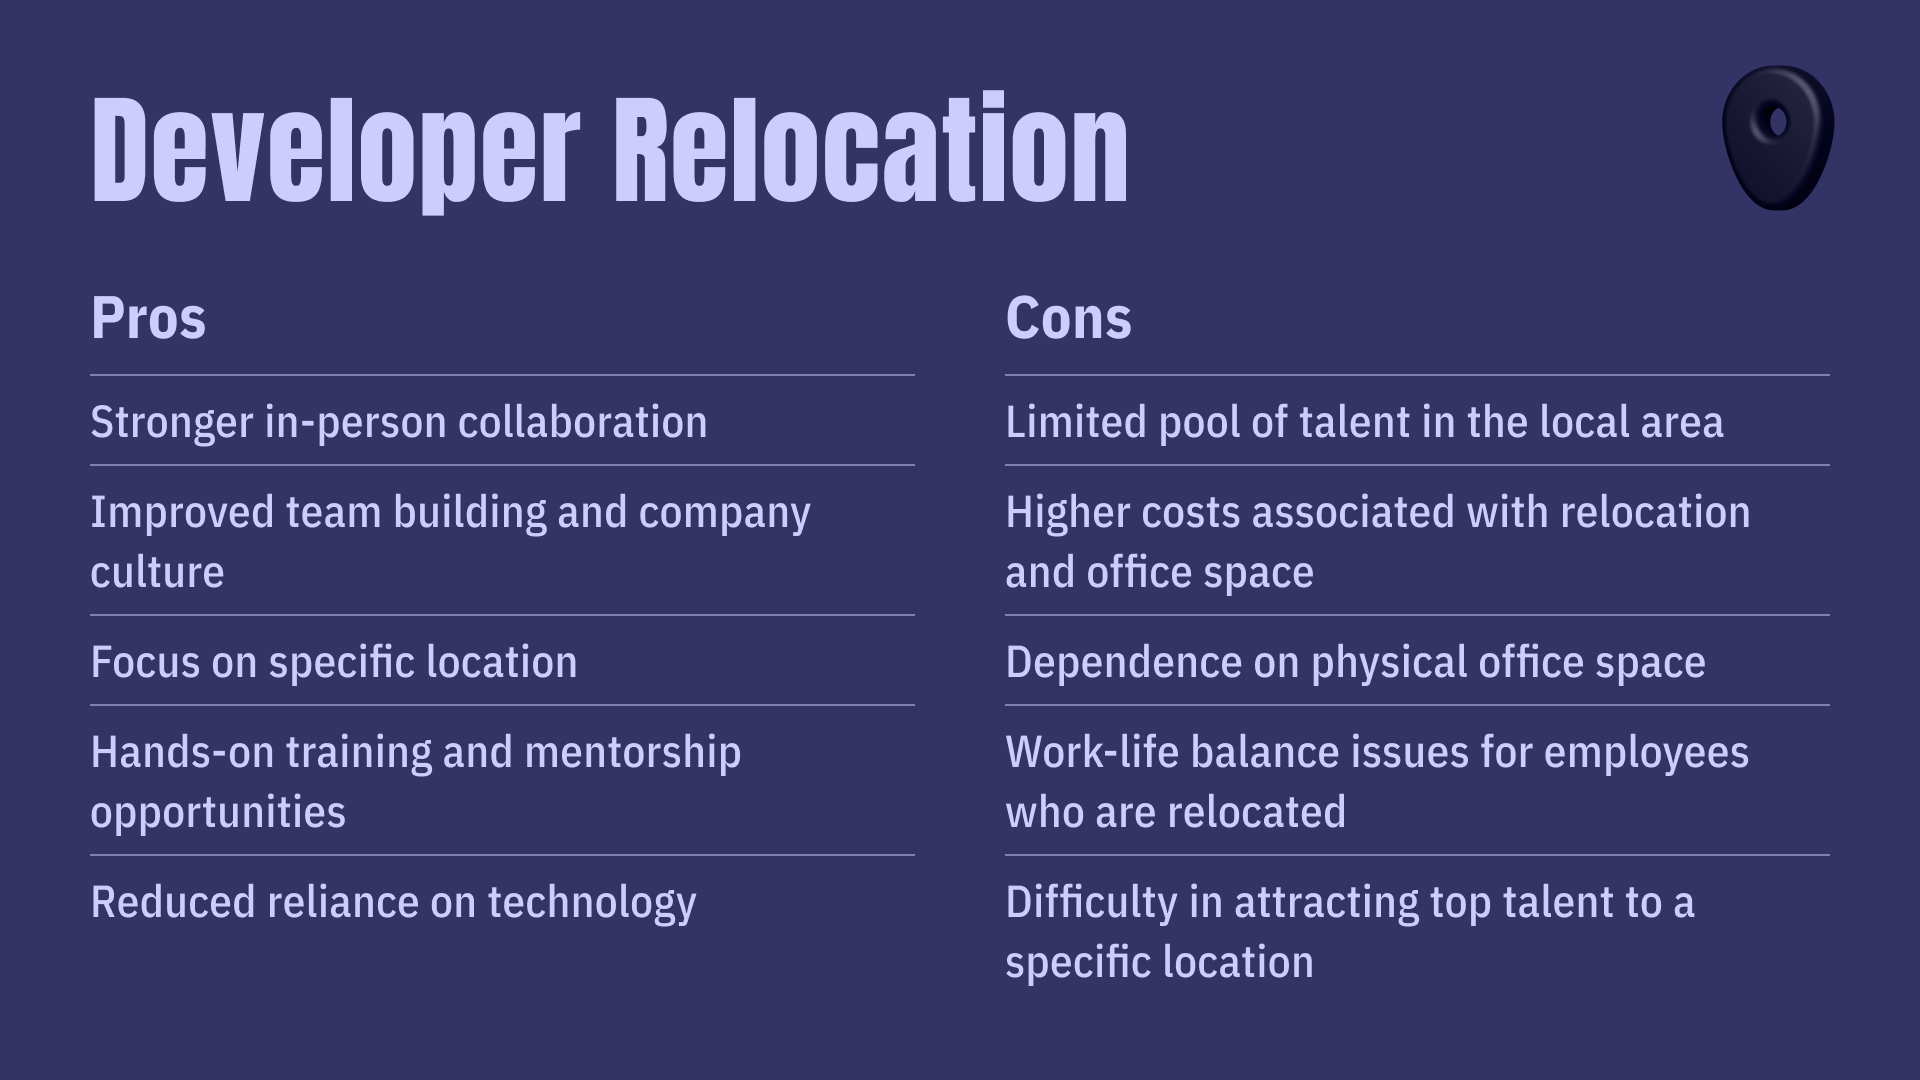 Pros and cons of developer relocation